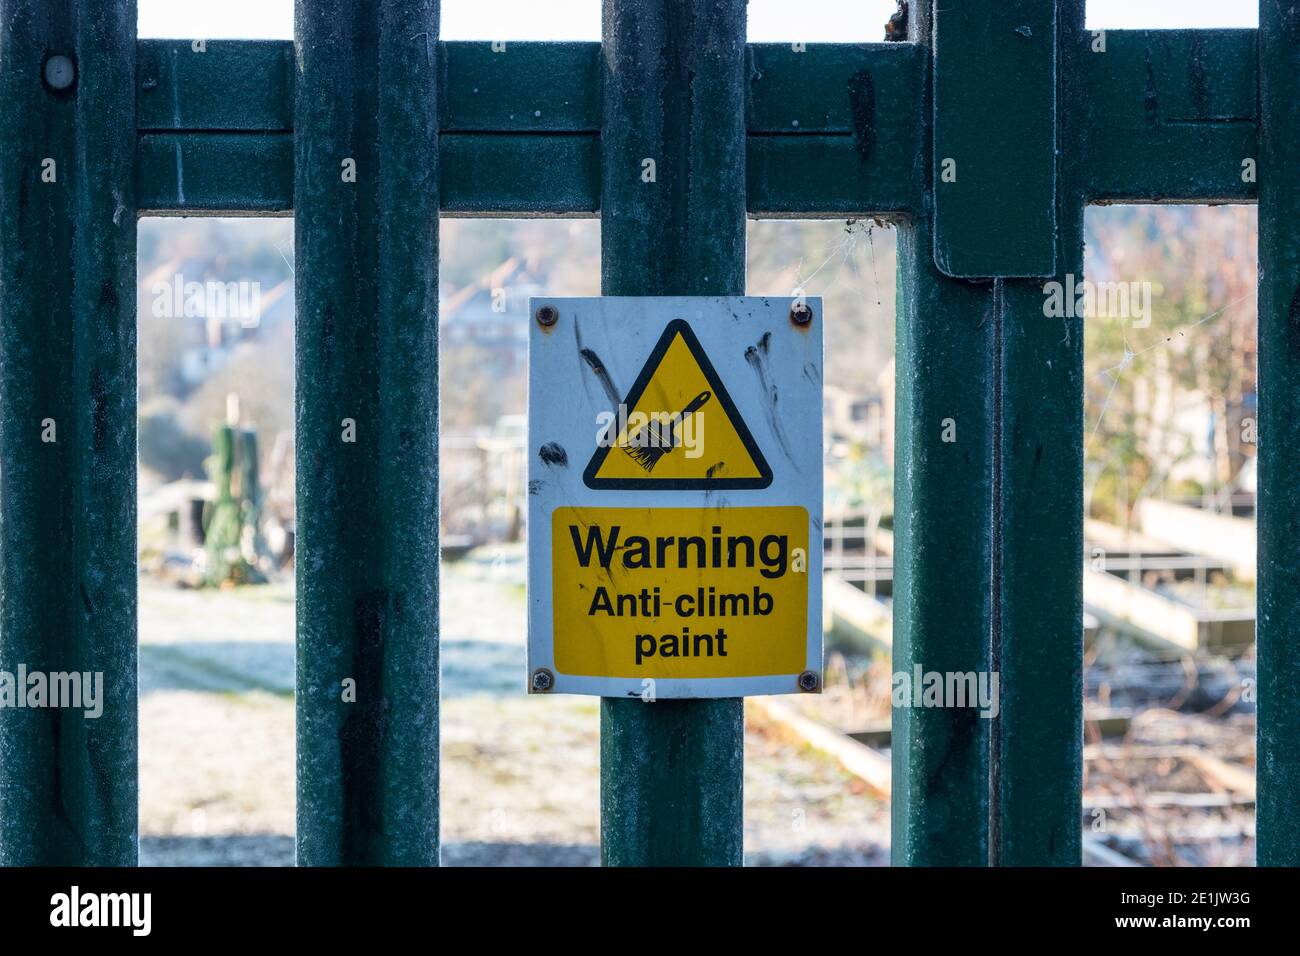 Warning sign - anti climb paint attached to metal fence Stock Photo